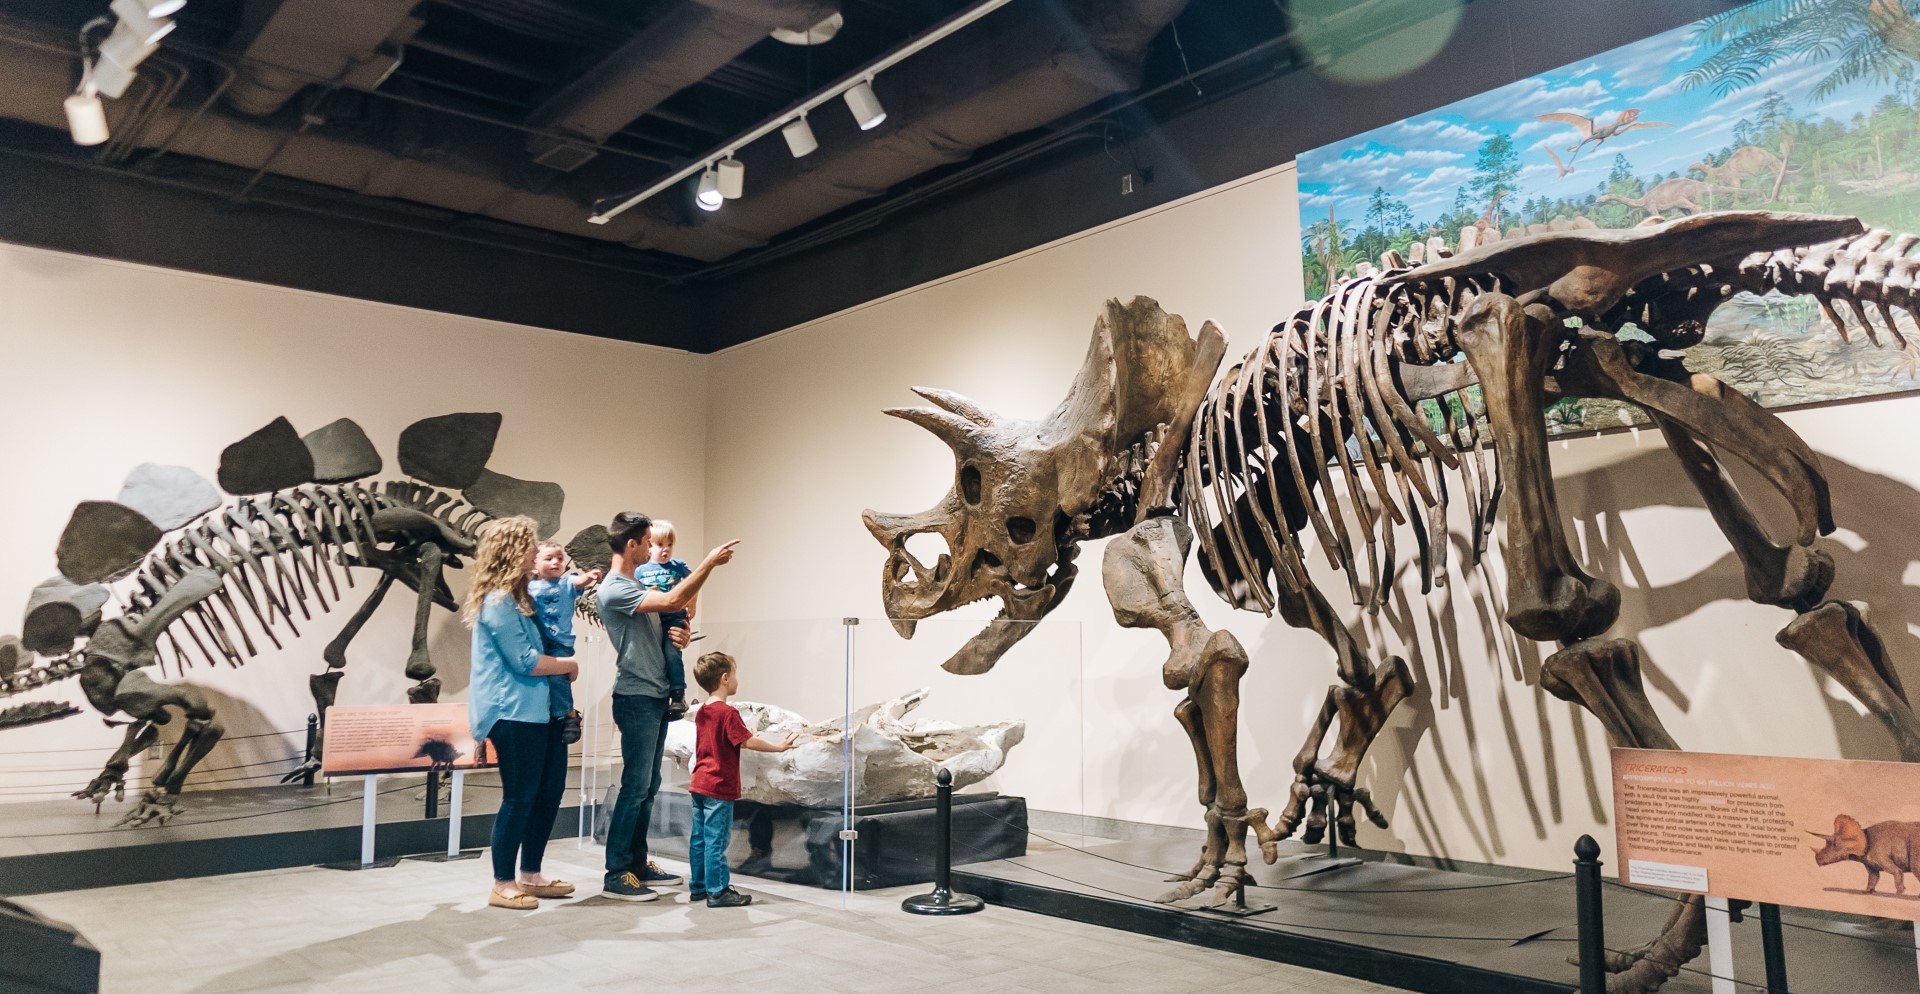 Triceratops (right) and Stegosaurus (left) will be two of the life-size cast skeletons on display!